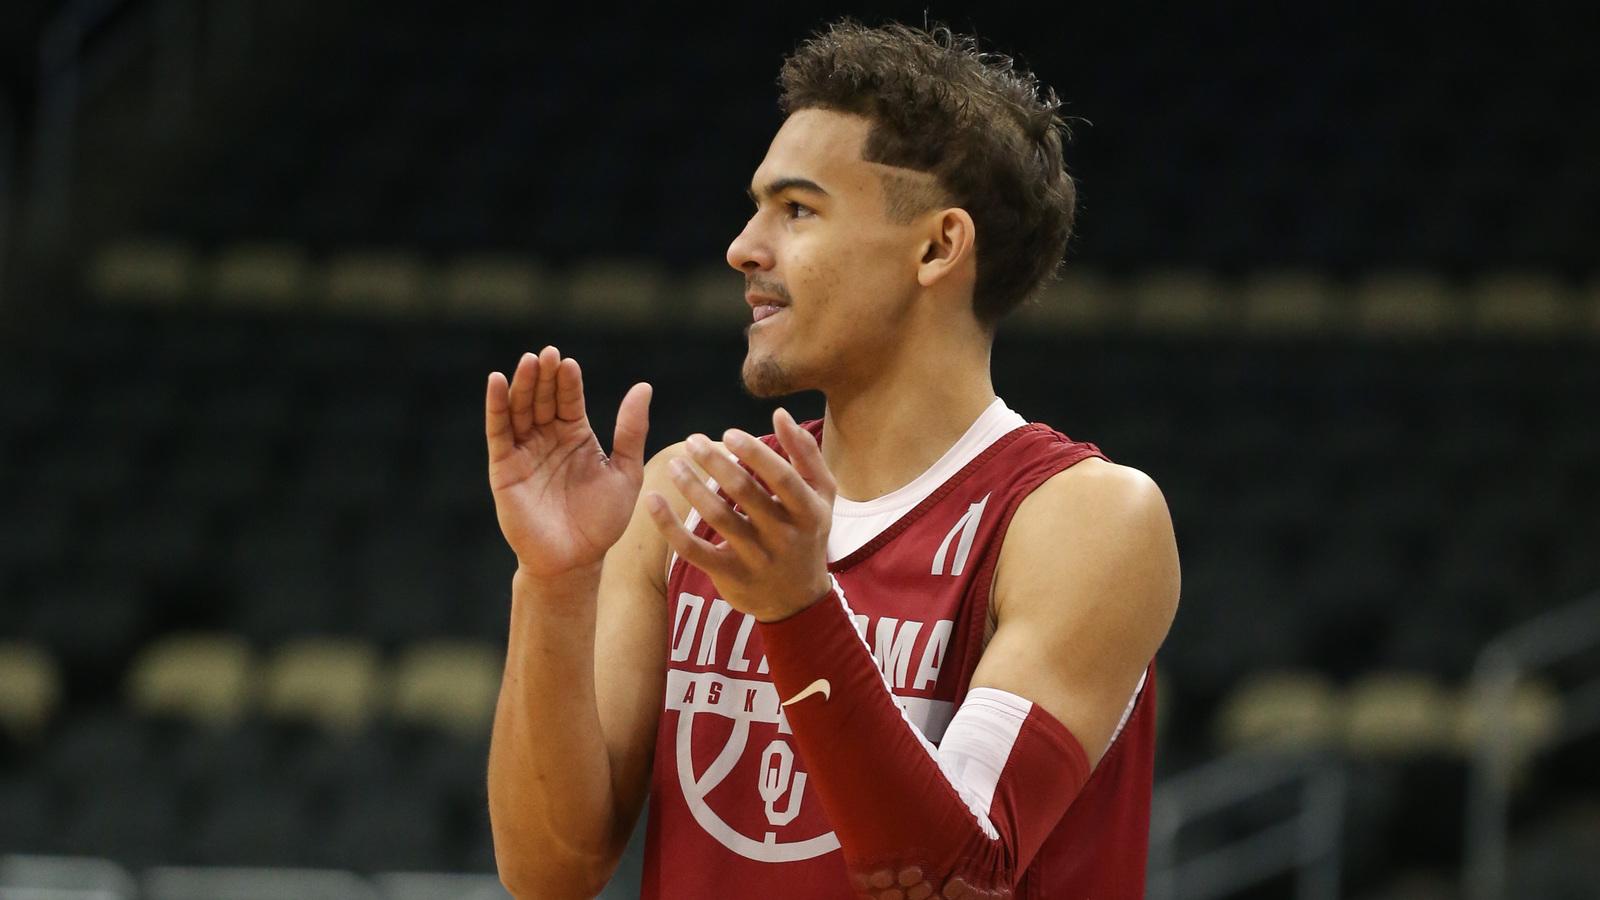 NBA scout compares Trae Young to Jimmer Fredette